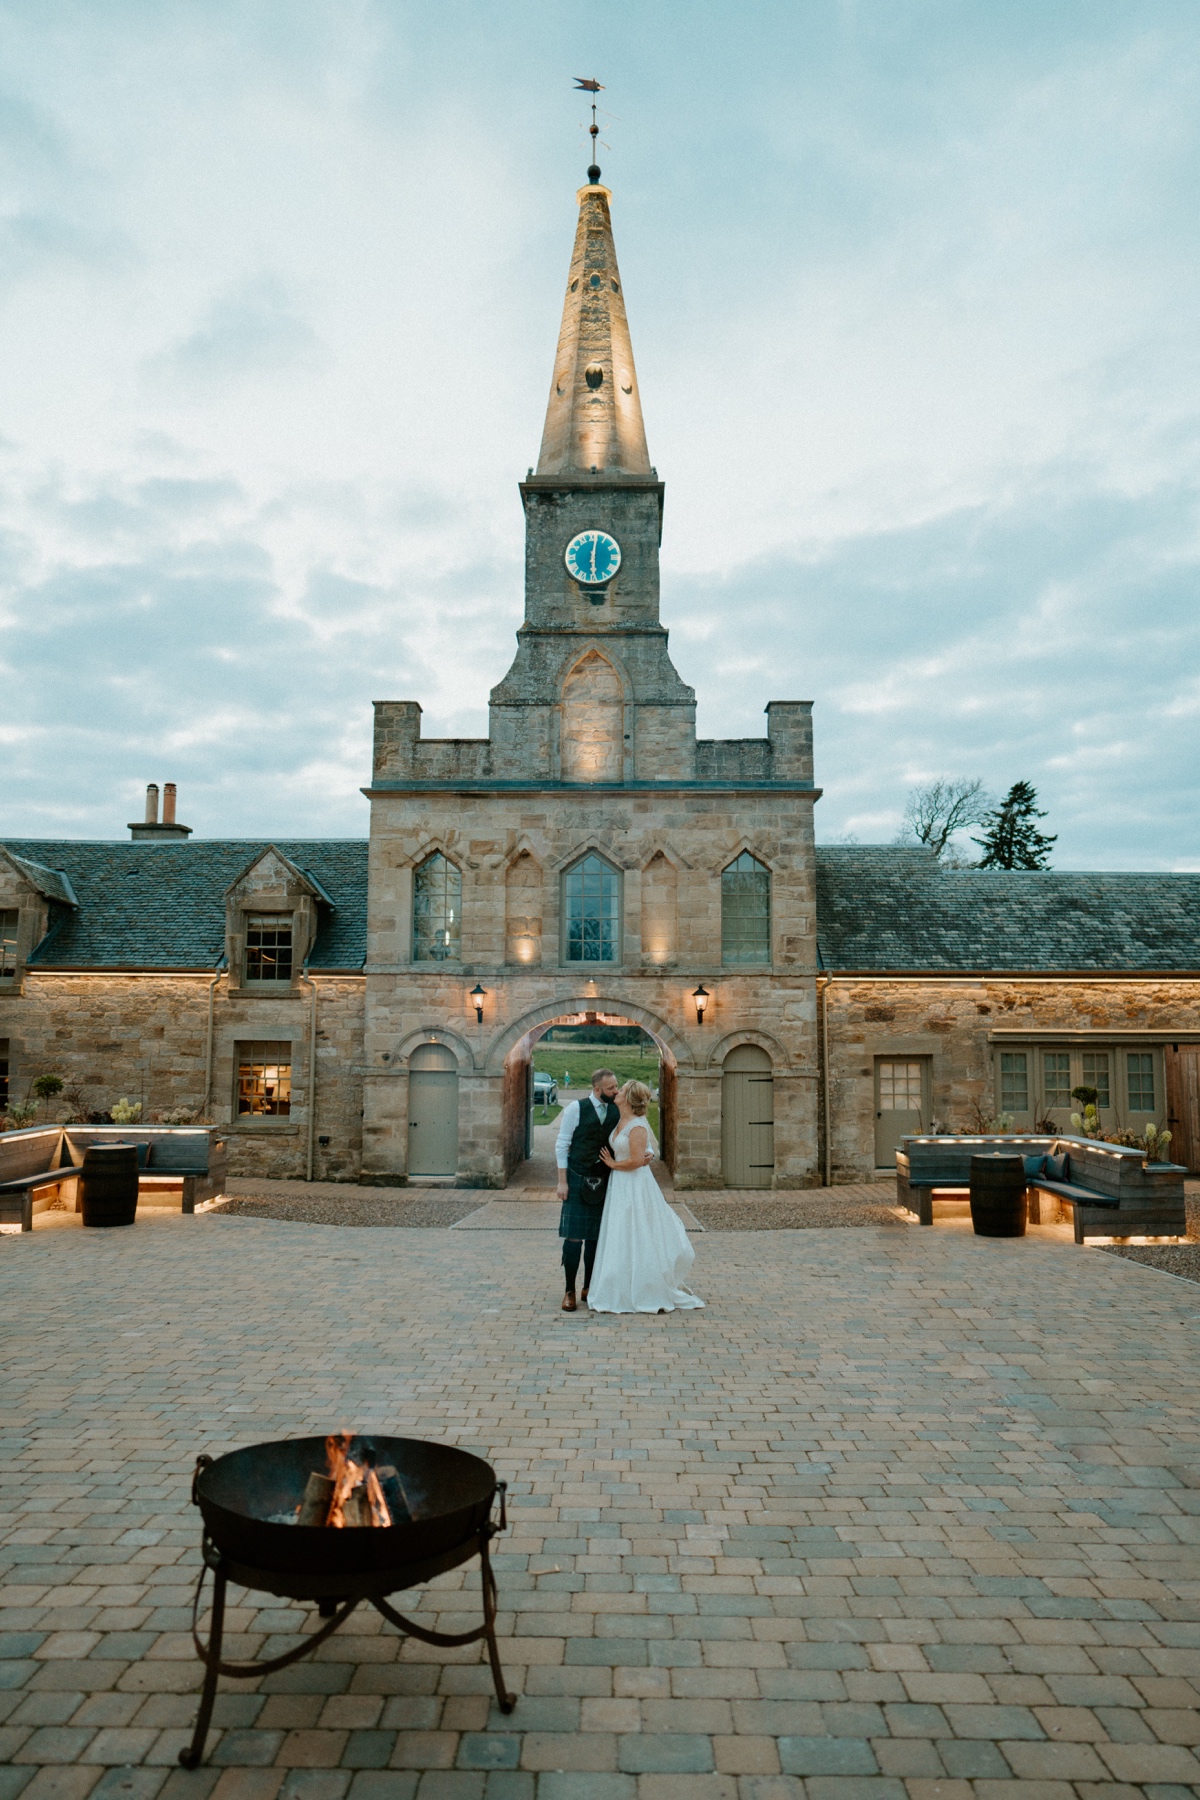 bride and groom kissing in courtyard of rosebery steadings in front of clock tower scottish humanist wedding